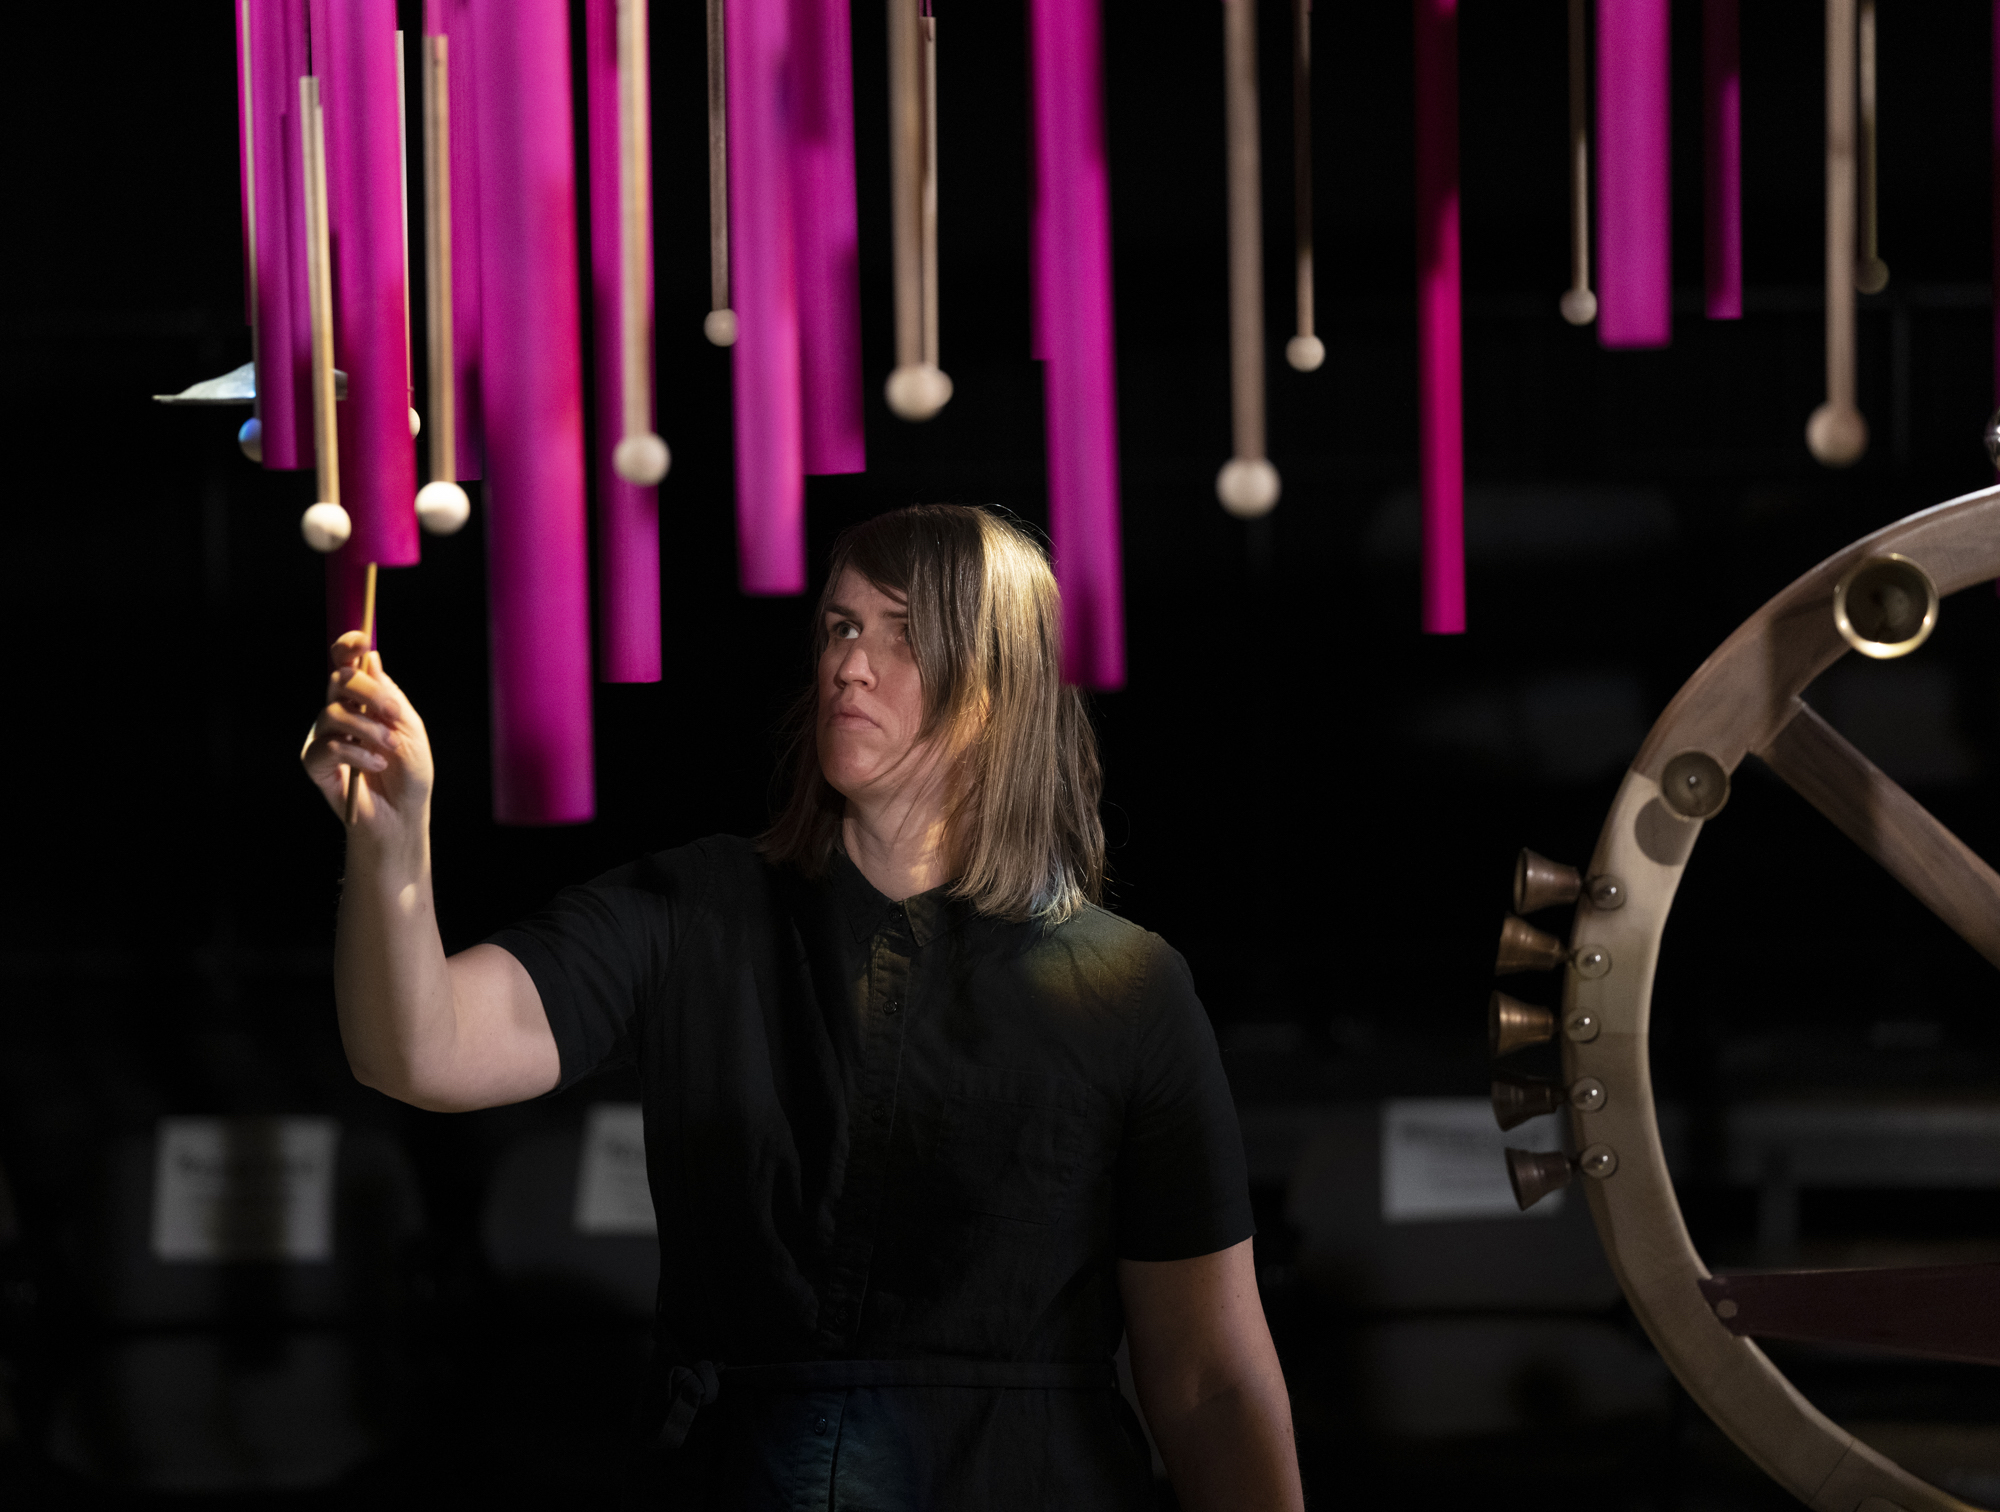 A white woman in a black shirt in a dark room raises a mallet among various brown mallets and hot pink pipes hanging down around her.